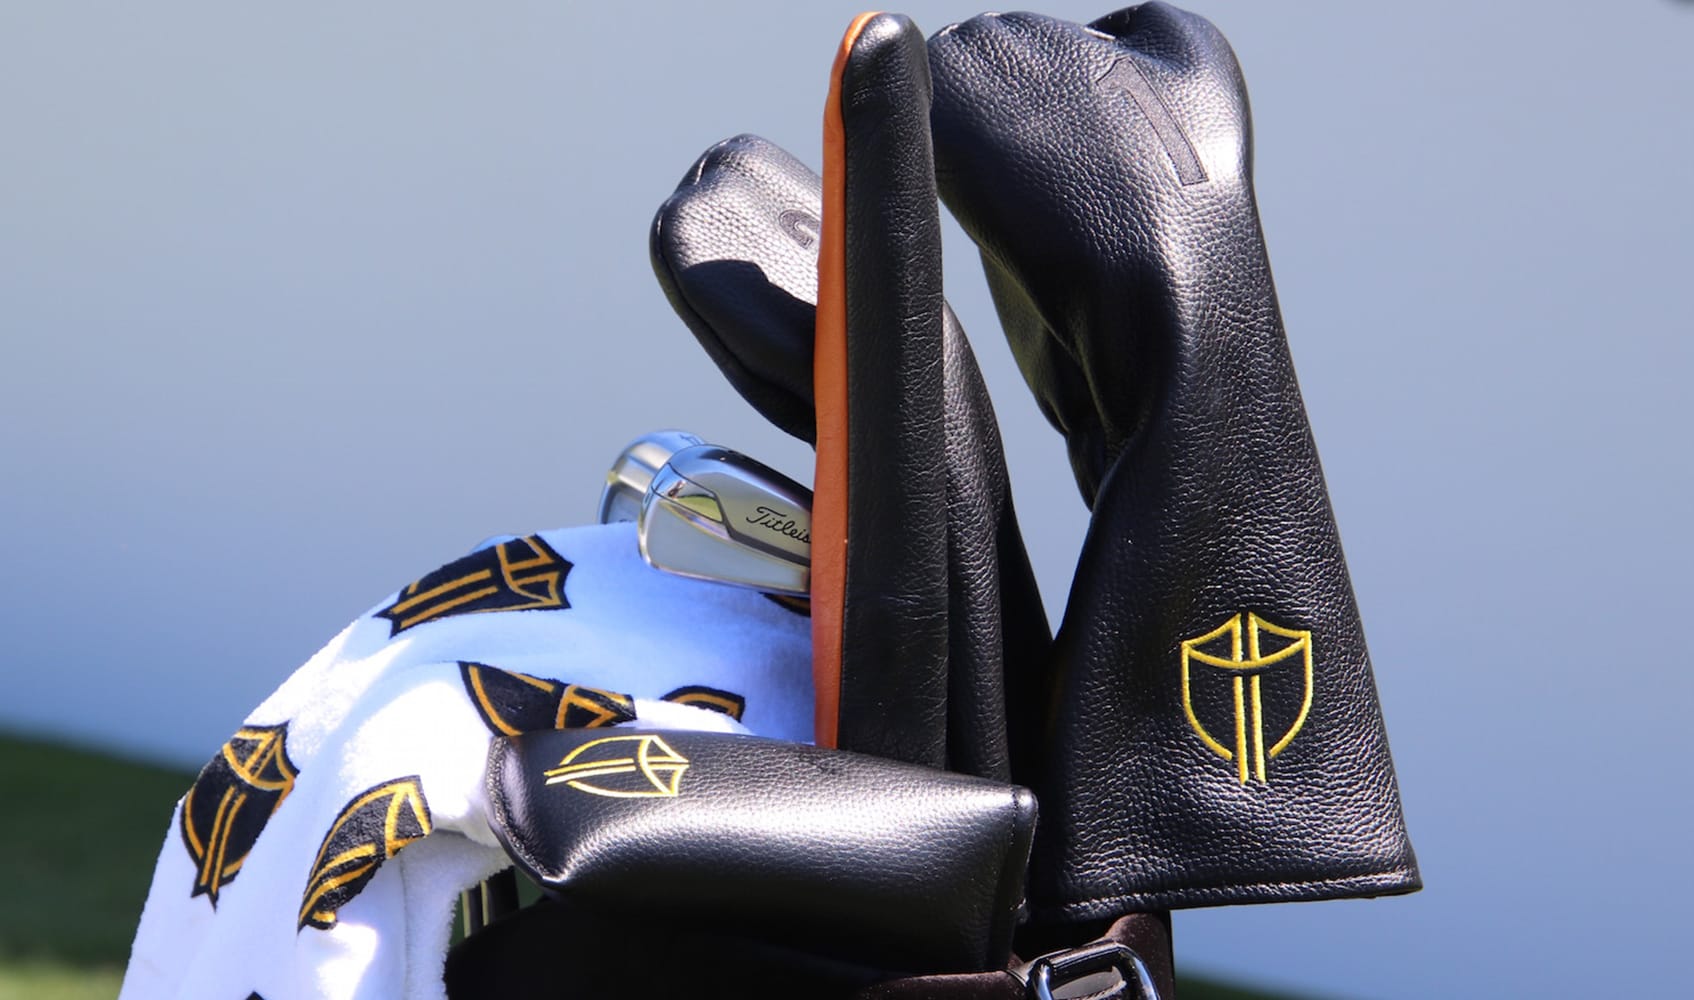 Spotted: Limited edition PGA Championship staff bags, headcovers